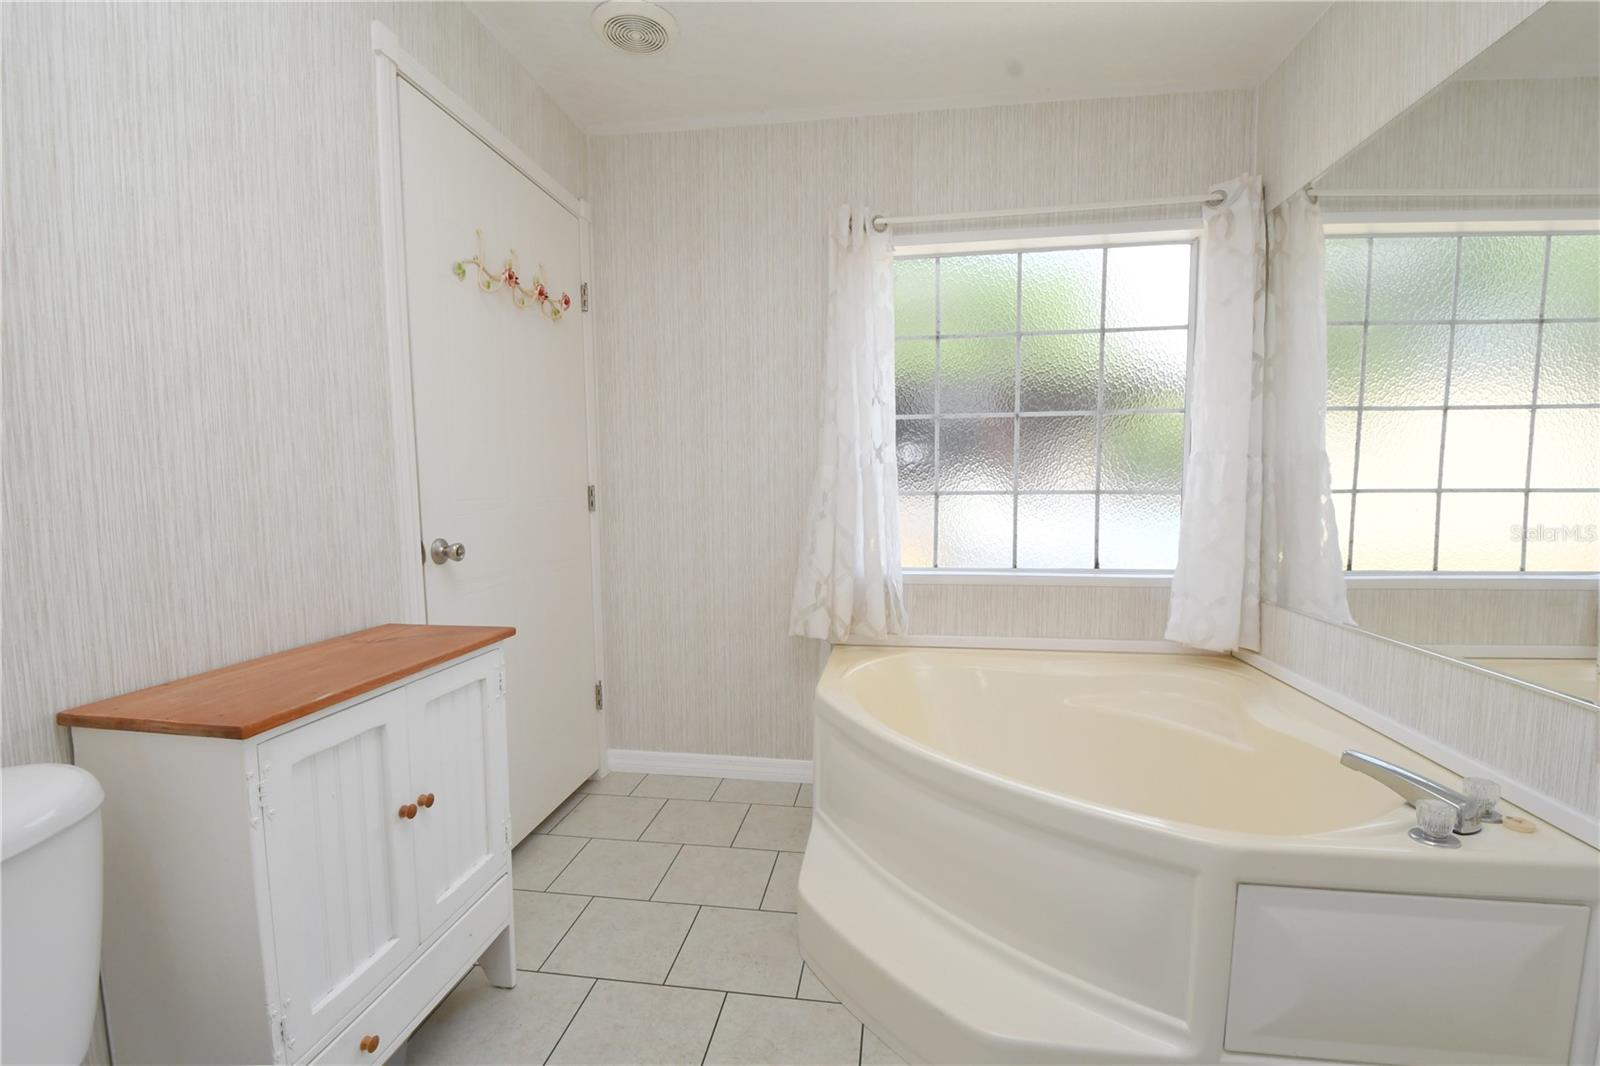 The soaking tub in the spacious master bath is the perfect place to unwind after a long day.